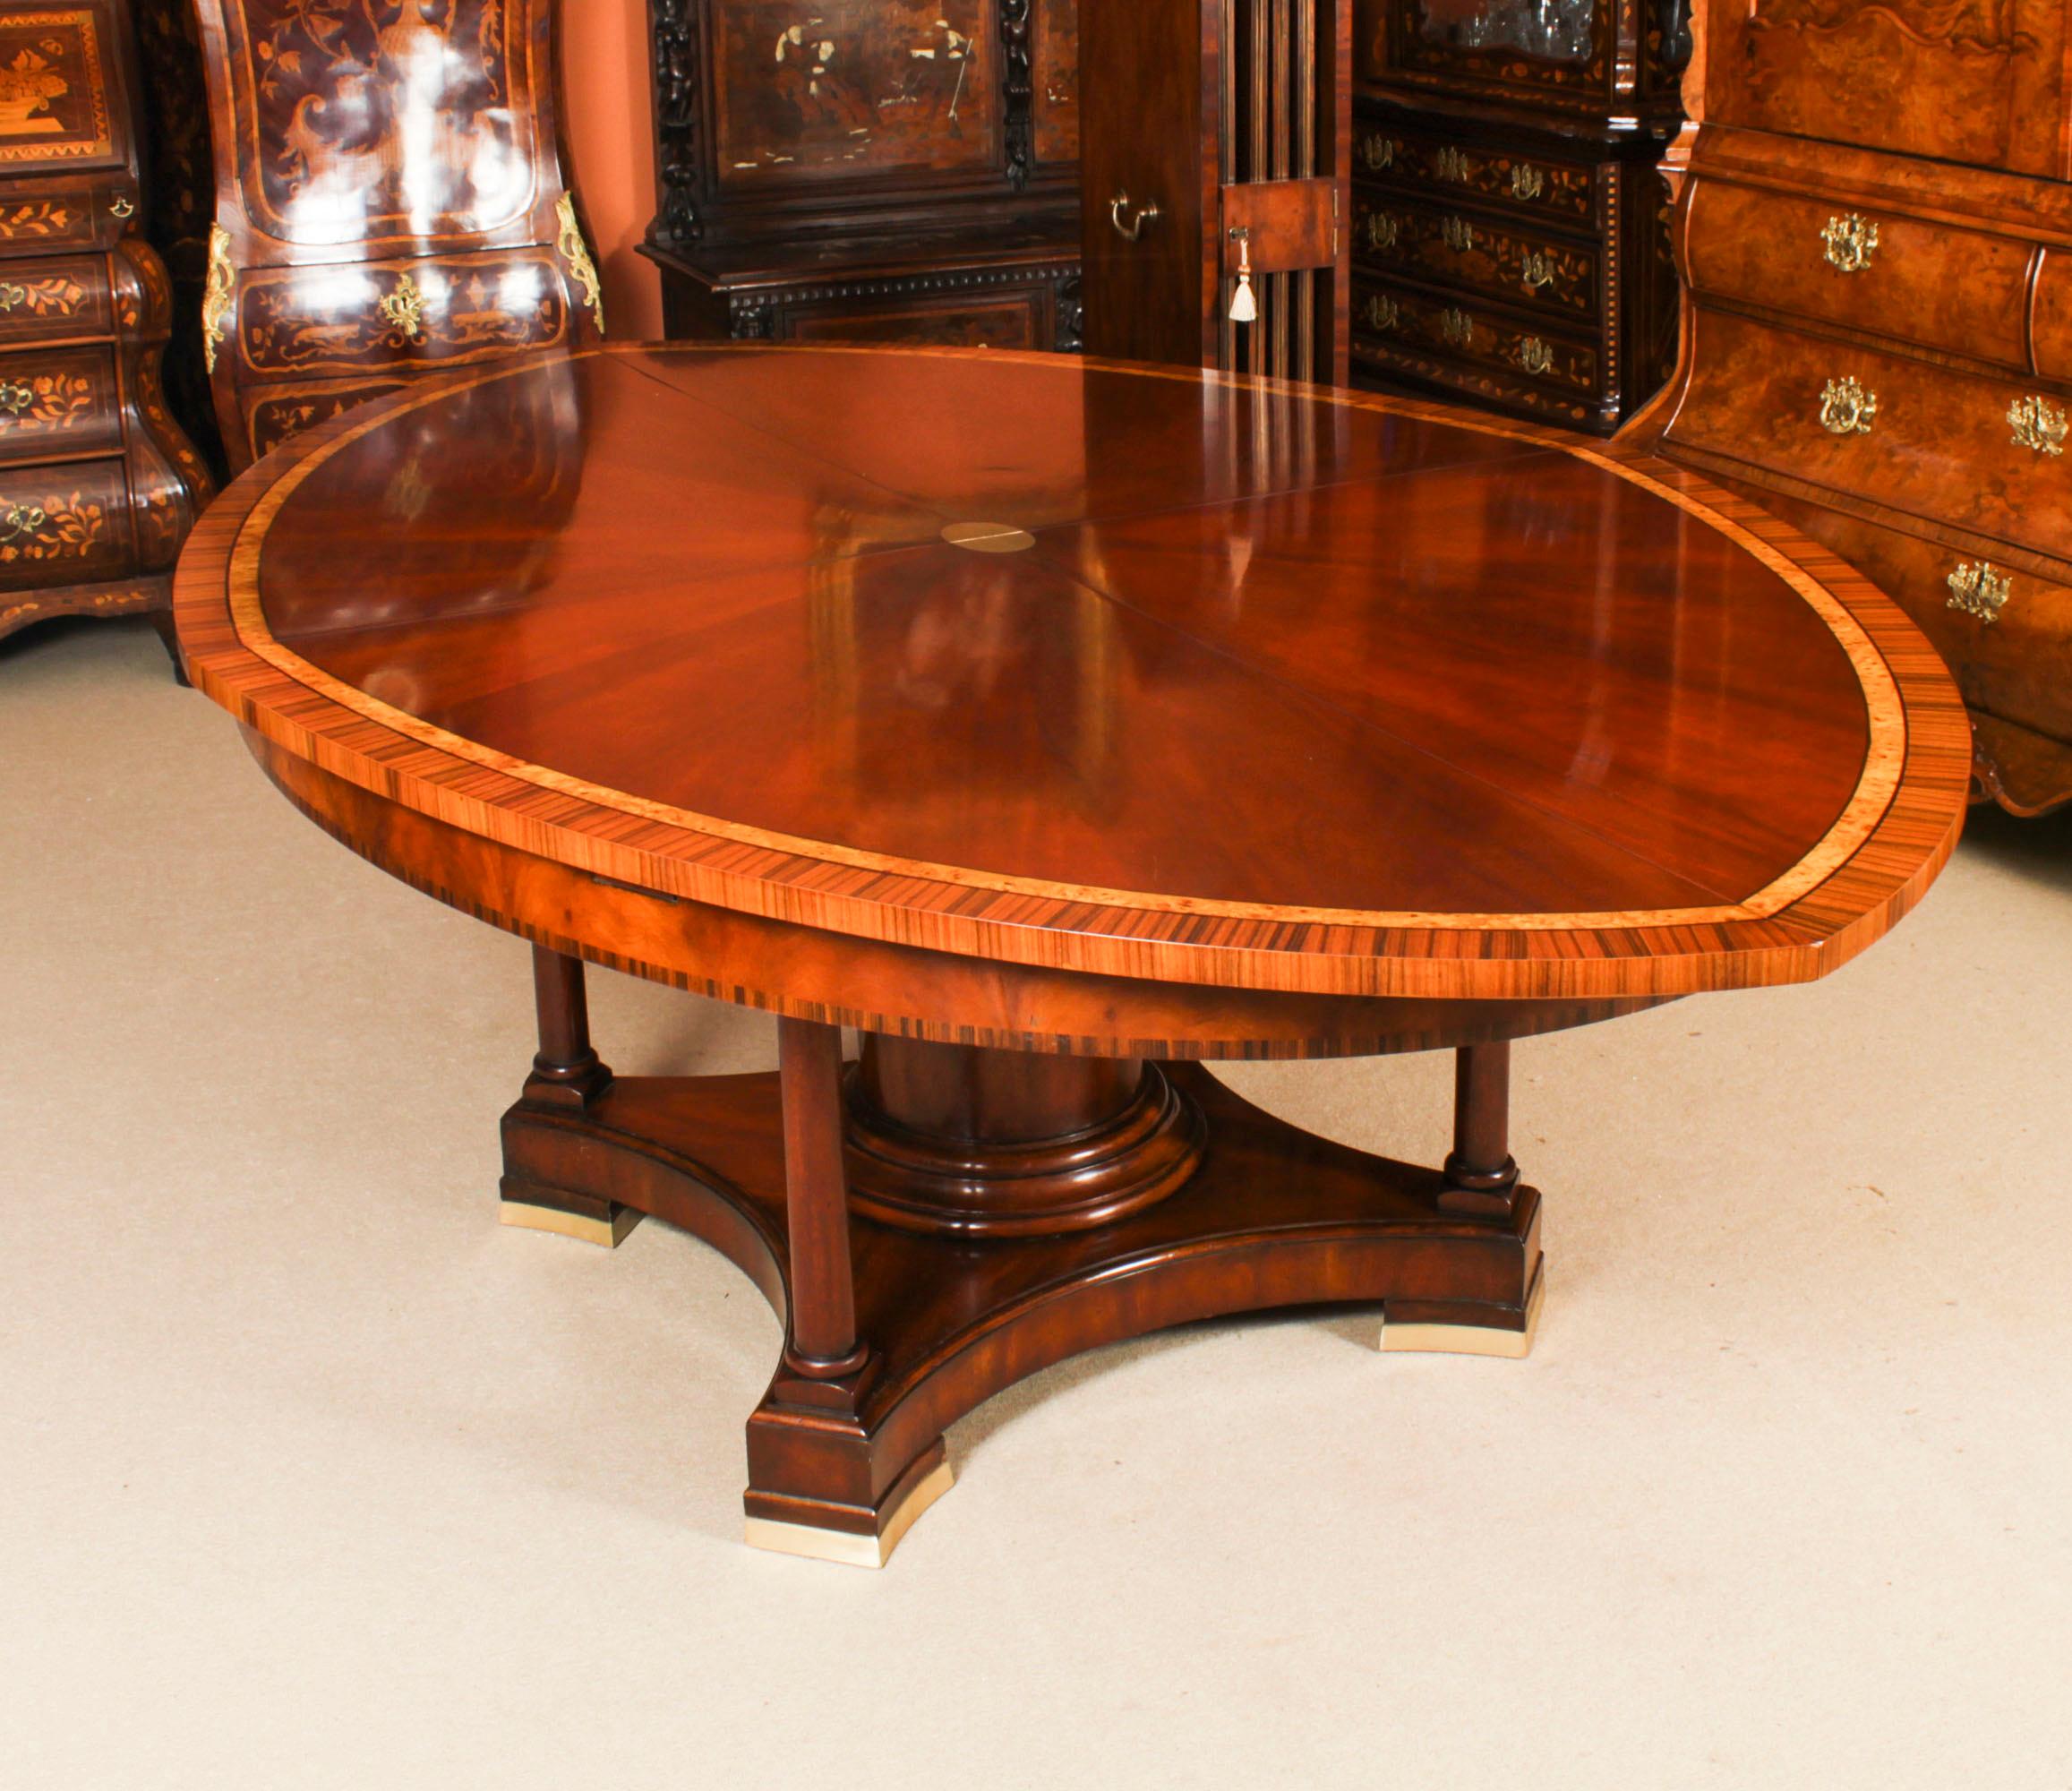 A superb oval flame mahogany and crossbanded  replica of Robert Jupe's flame mahogany extending dining table, dating from the second half of the 20th century.

The flame mahogany veneers on the top have been arranged so as to give a striking